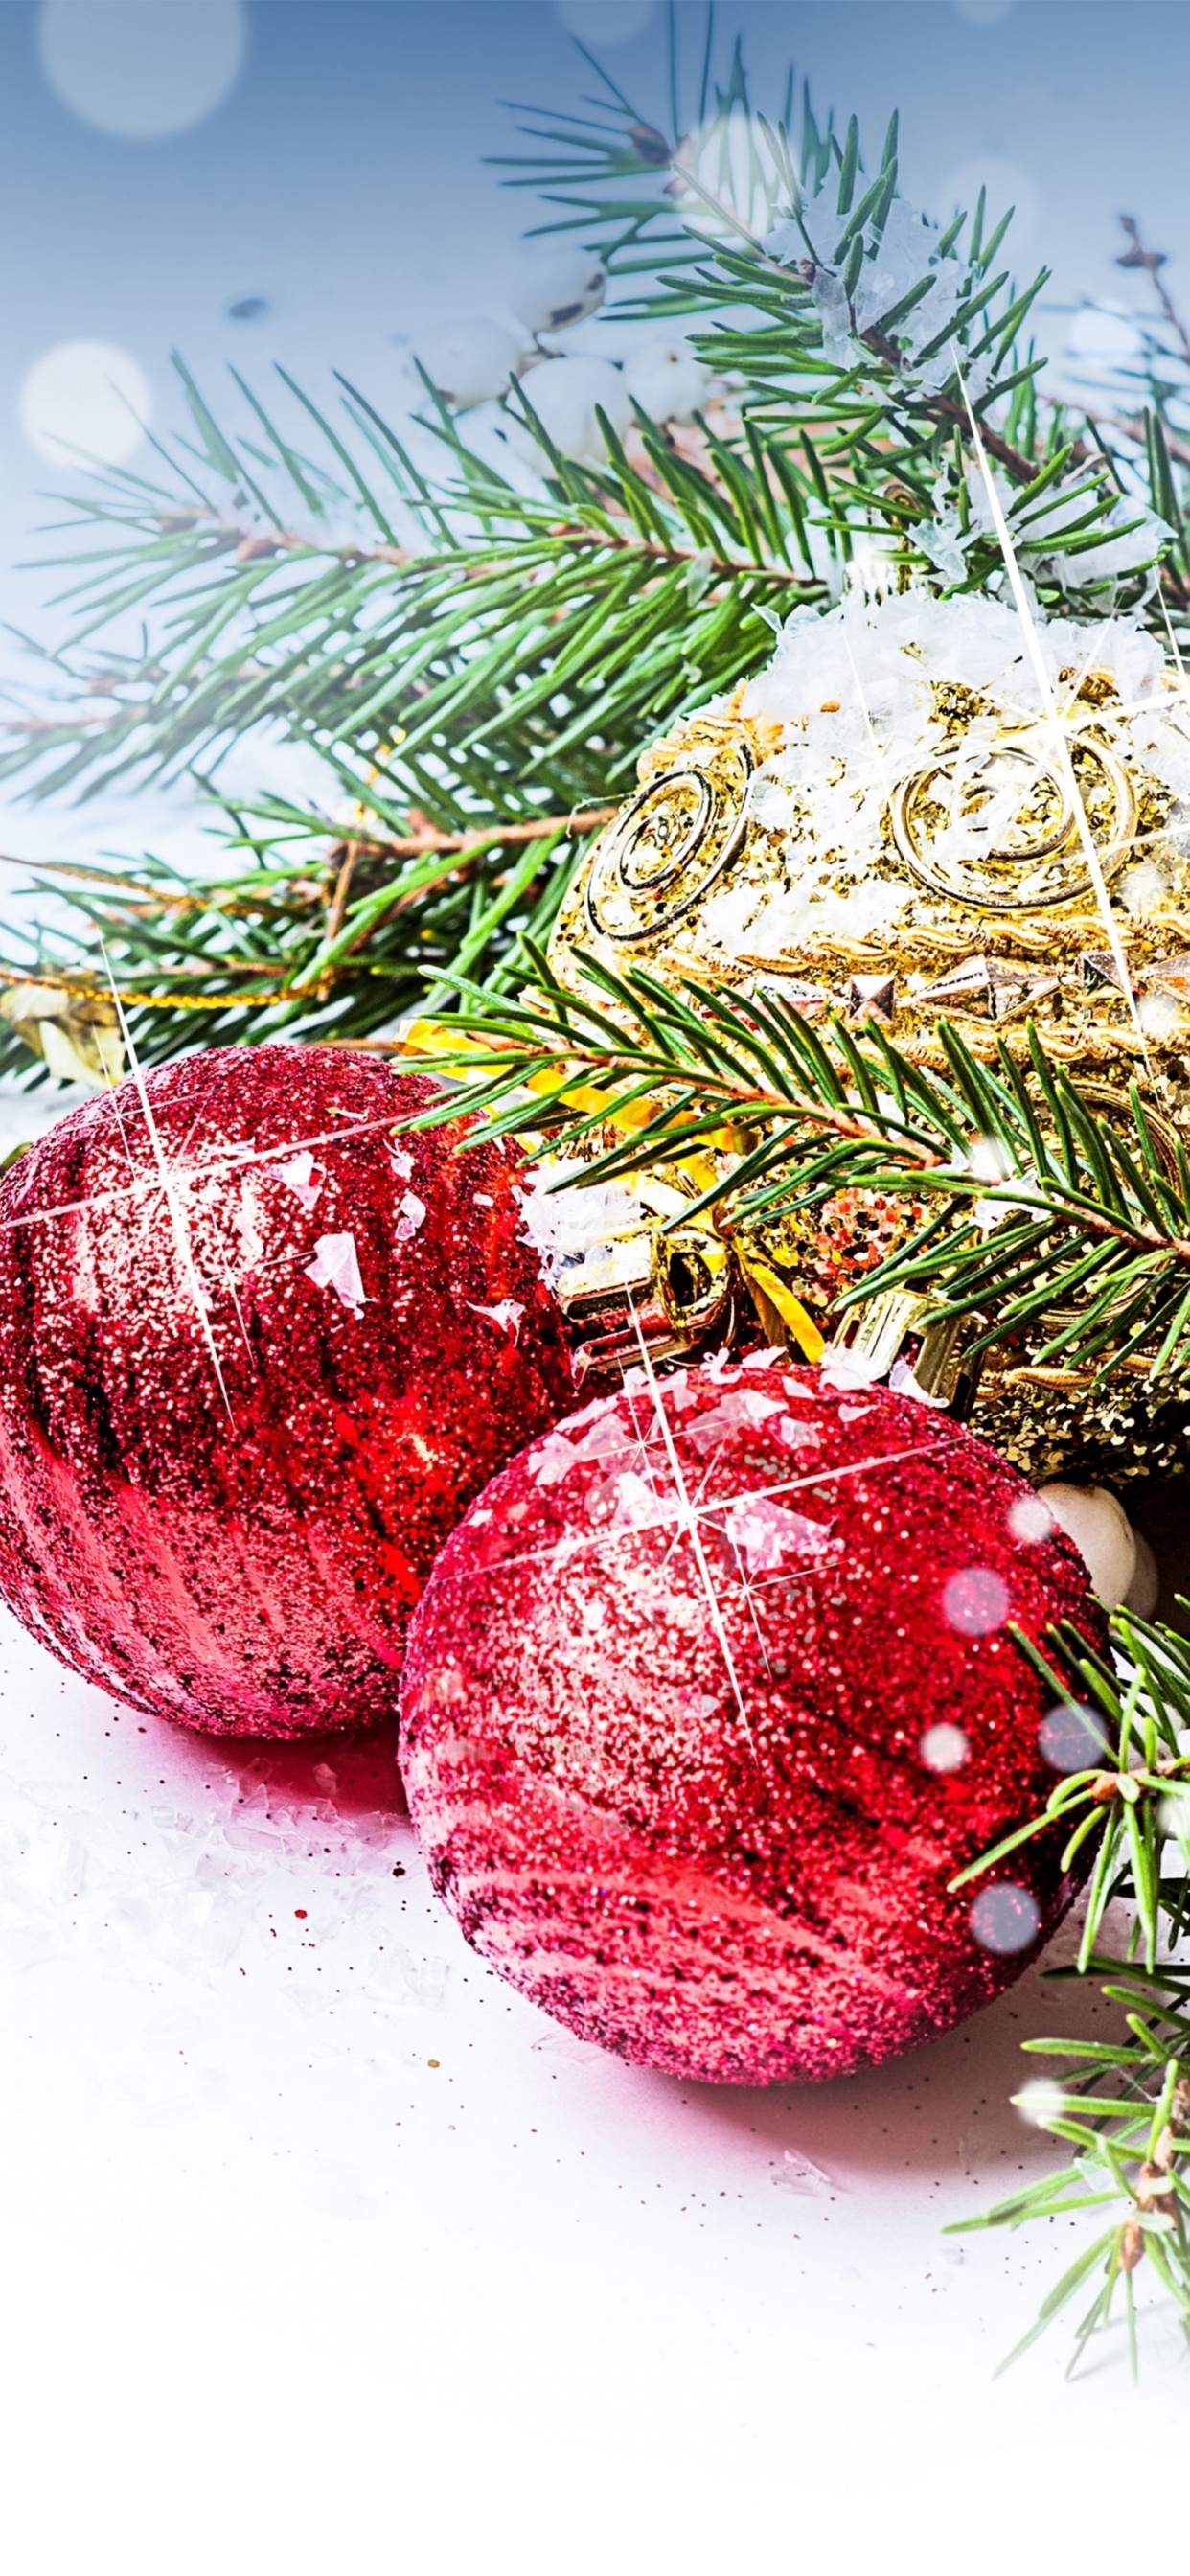 Christmas Ornament, Christmas Day, New Year, Christmas Tree, Christmas Decoration. Wallpaper in 1242x2688 Resolution